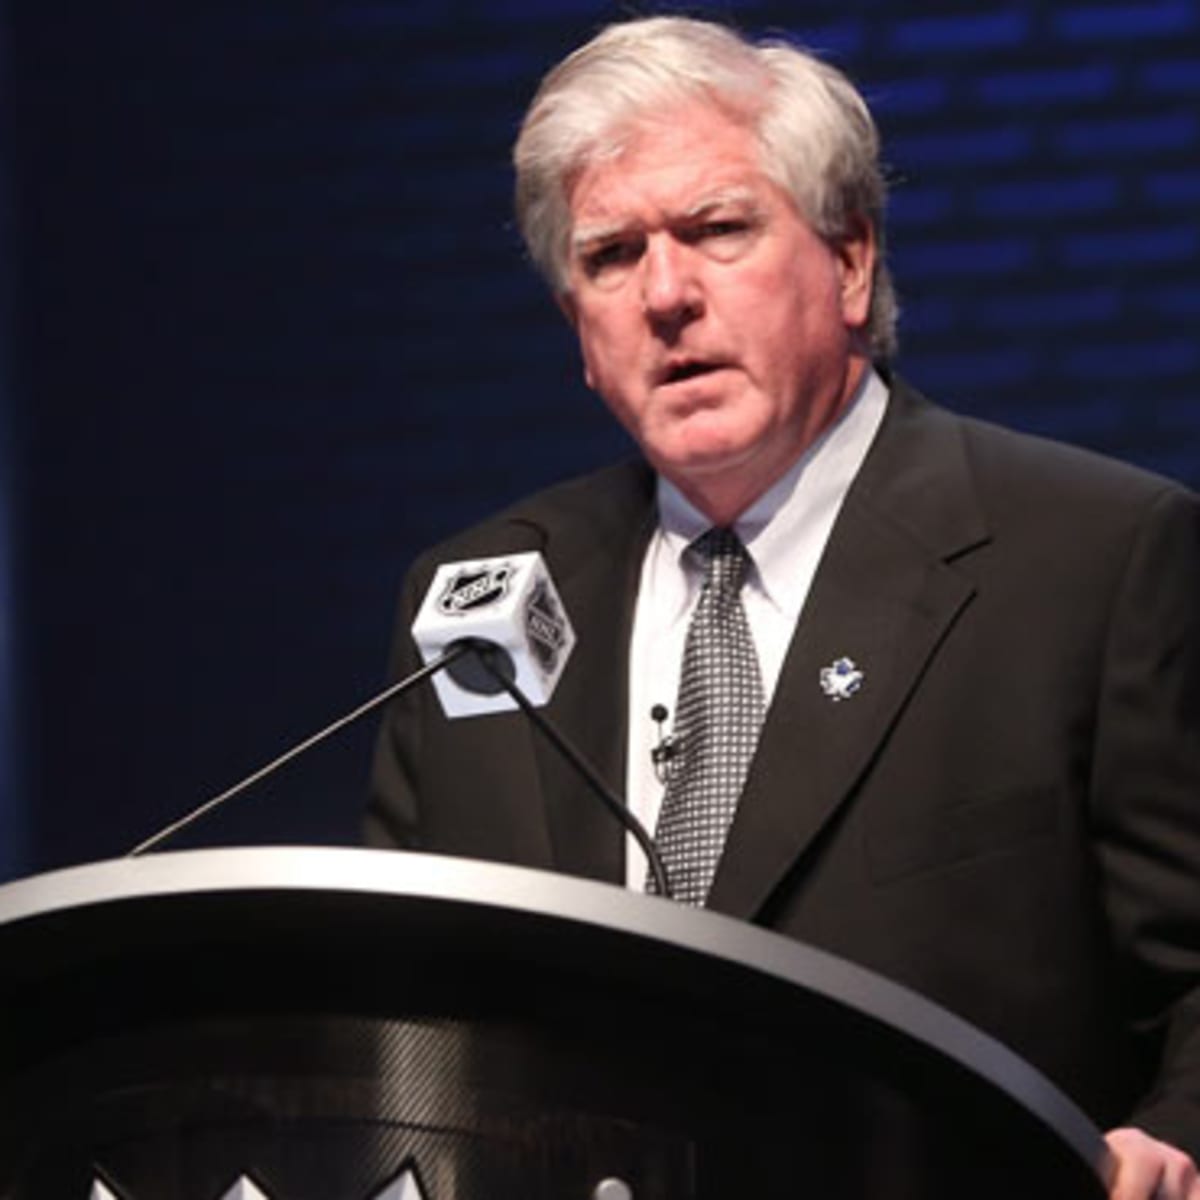 Pride Tape co-founder, Brian Burke call NHL's ban a 'serious setback